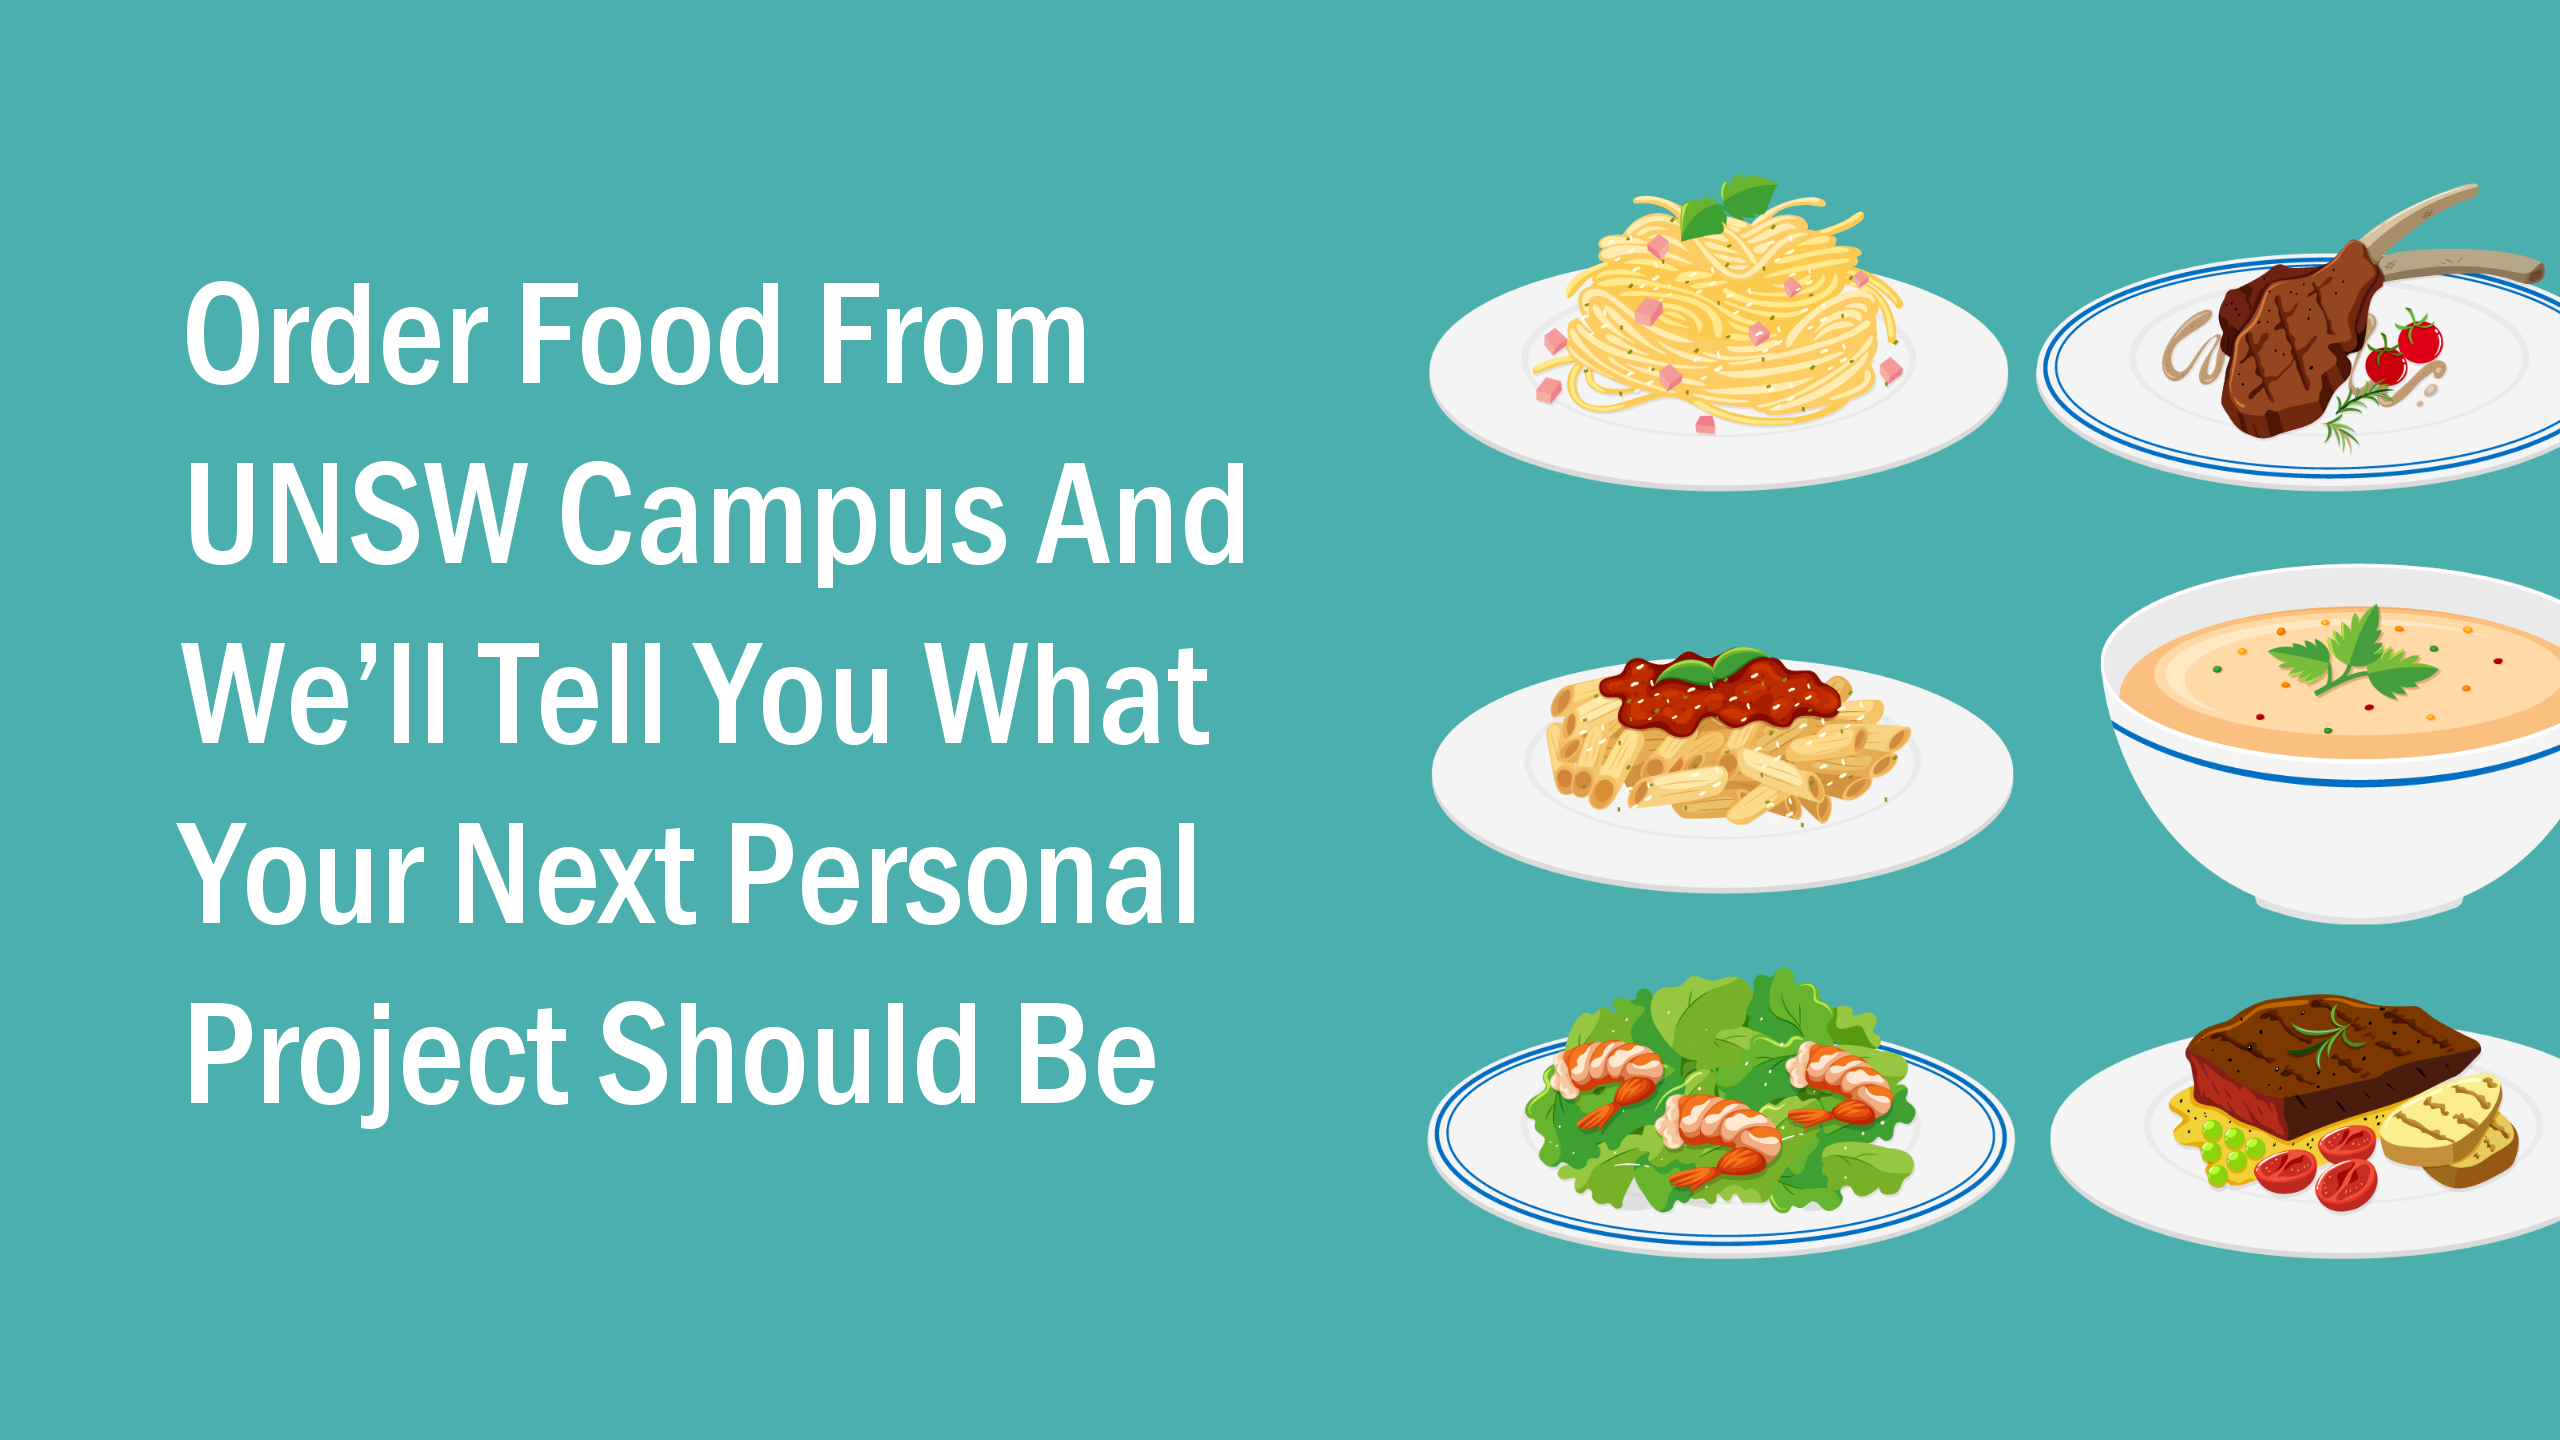 Order Food From UNSW Campus And We’ll Tell You What Your Next Personal Project Should Be